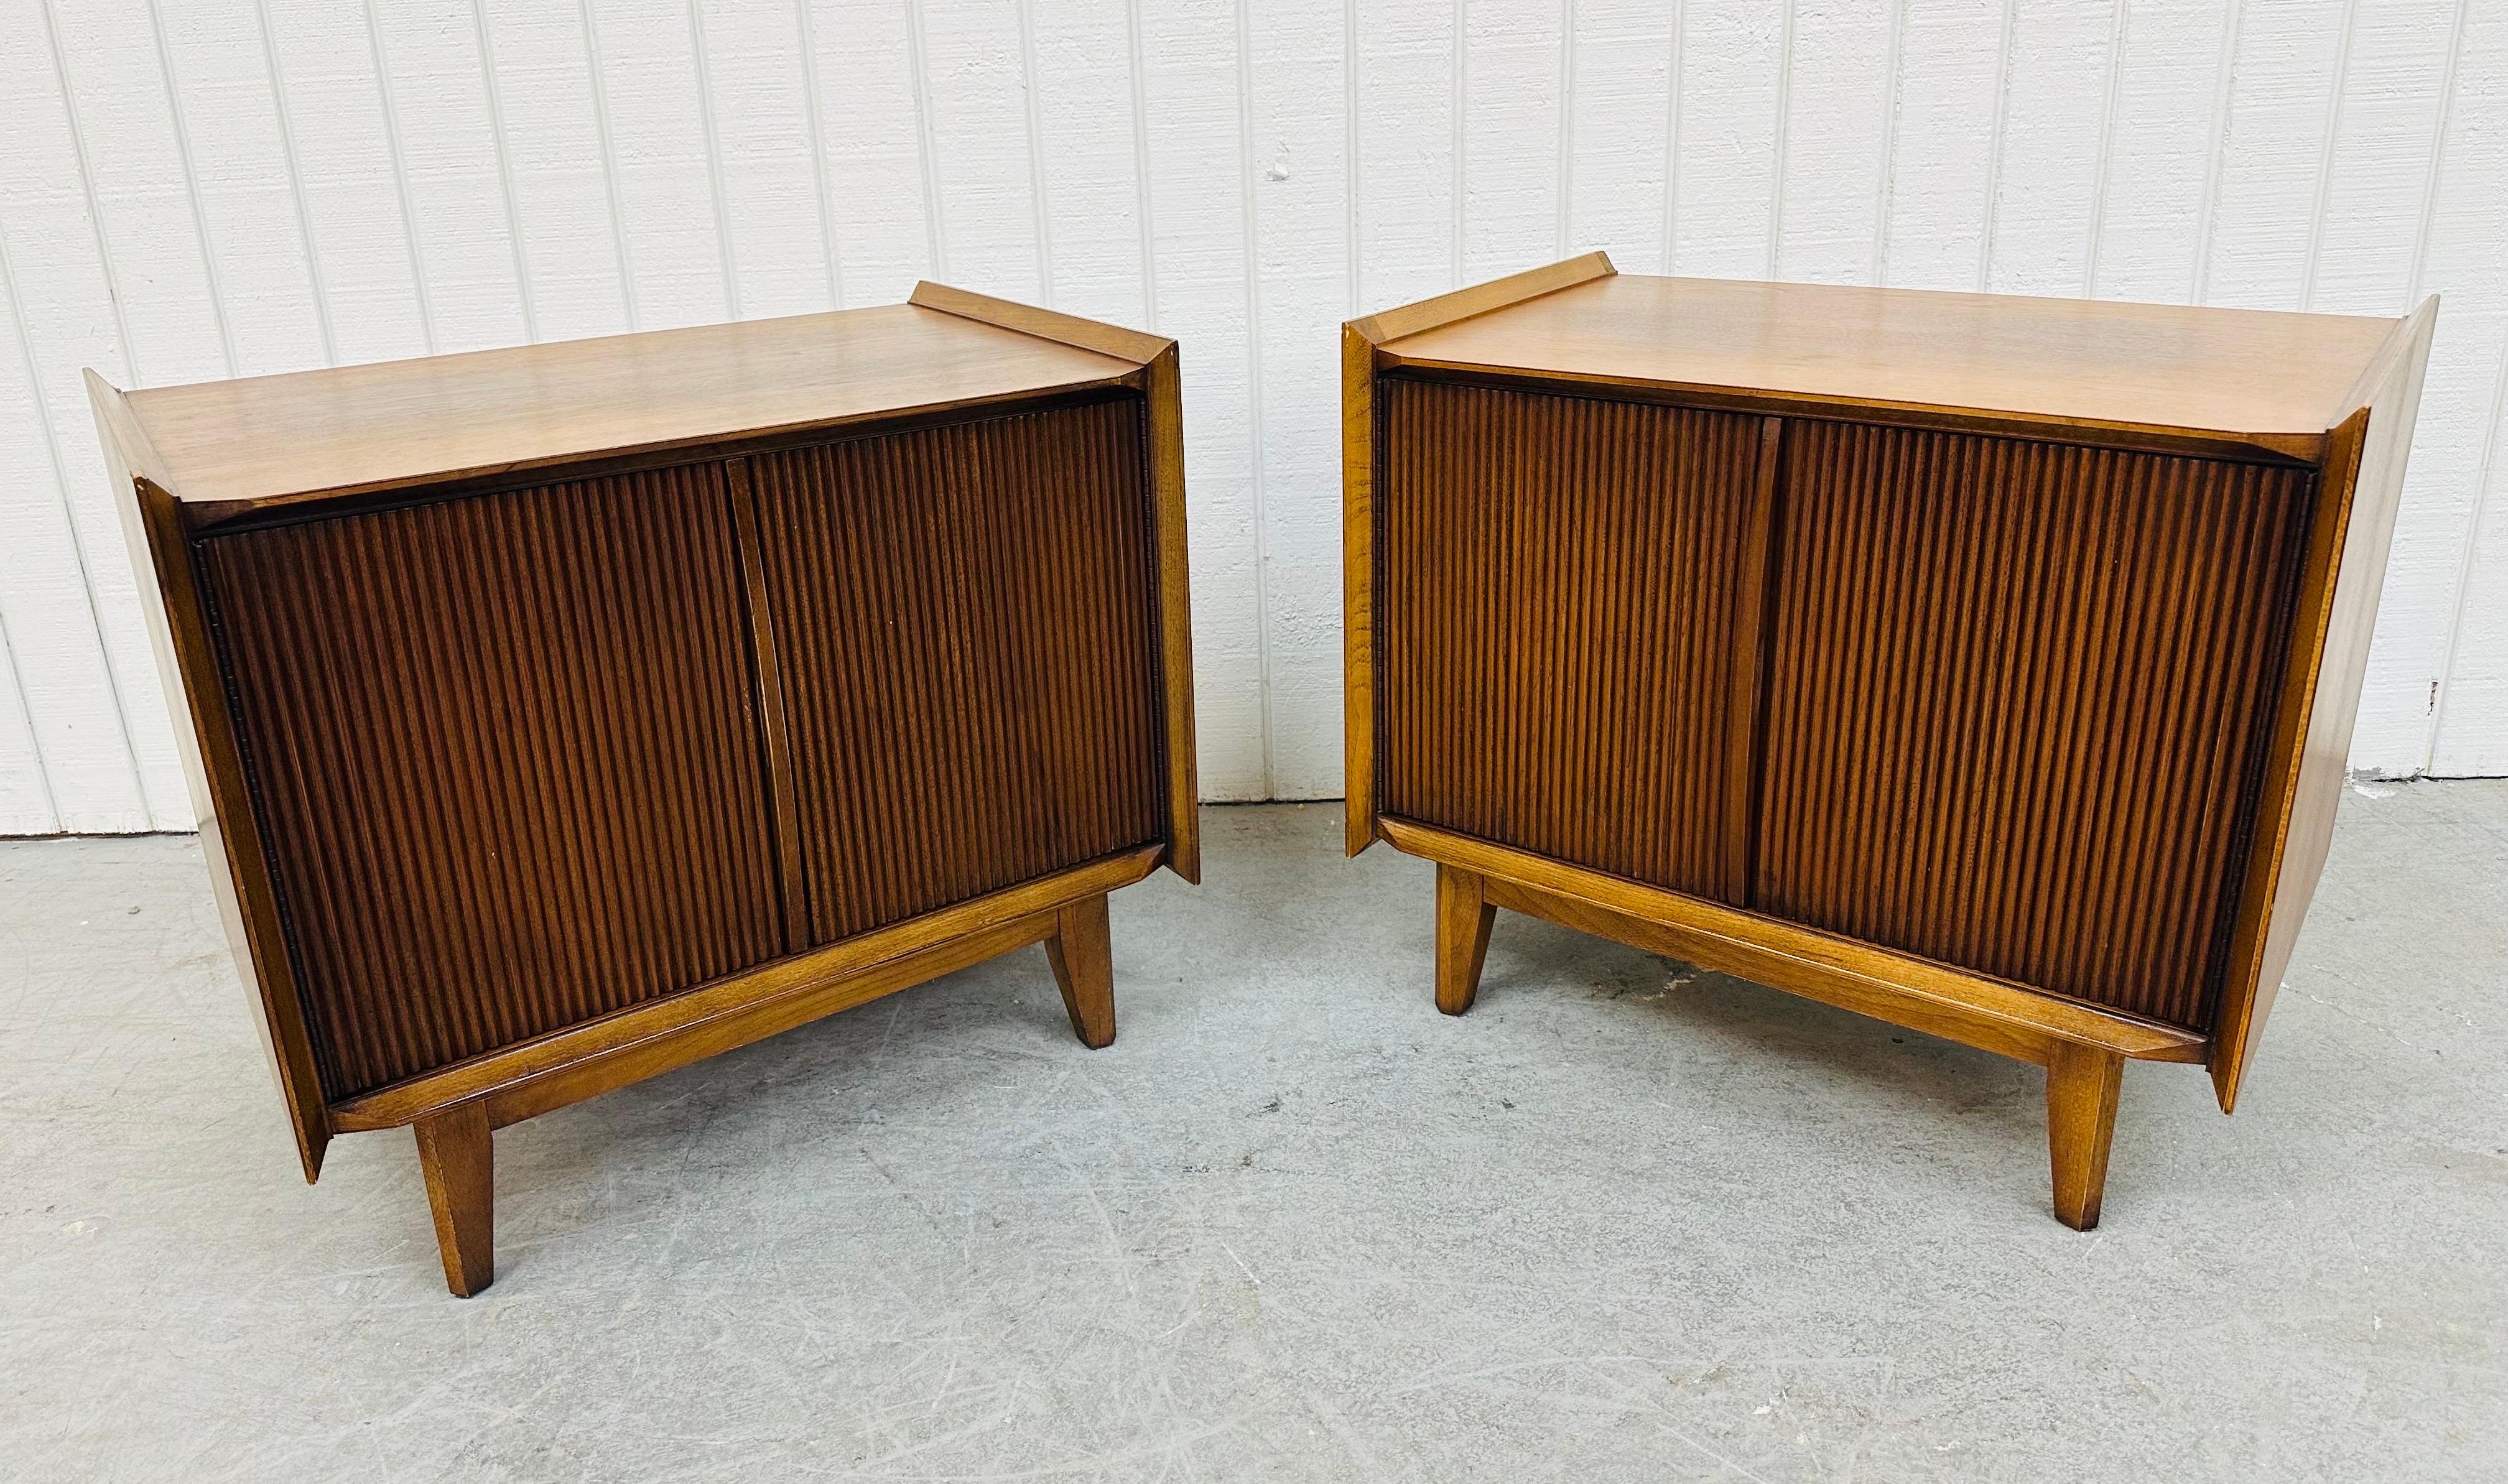 This listing is for a pair of Mid-Century Modern Lane “1st Edition” Walnut Nightstands. Features a straight line design, two reeded style doors that open up to storage space, modern legs, and a beautiful walnut finish. This is an exceptional